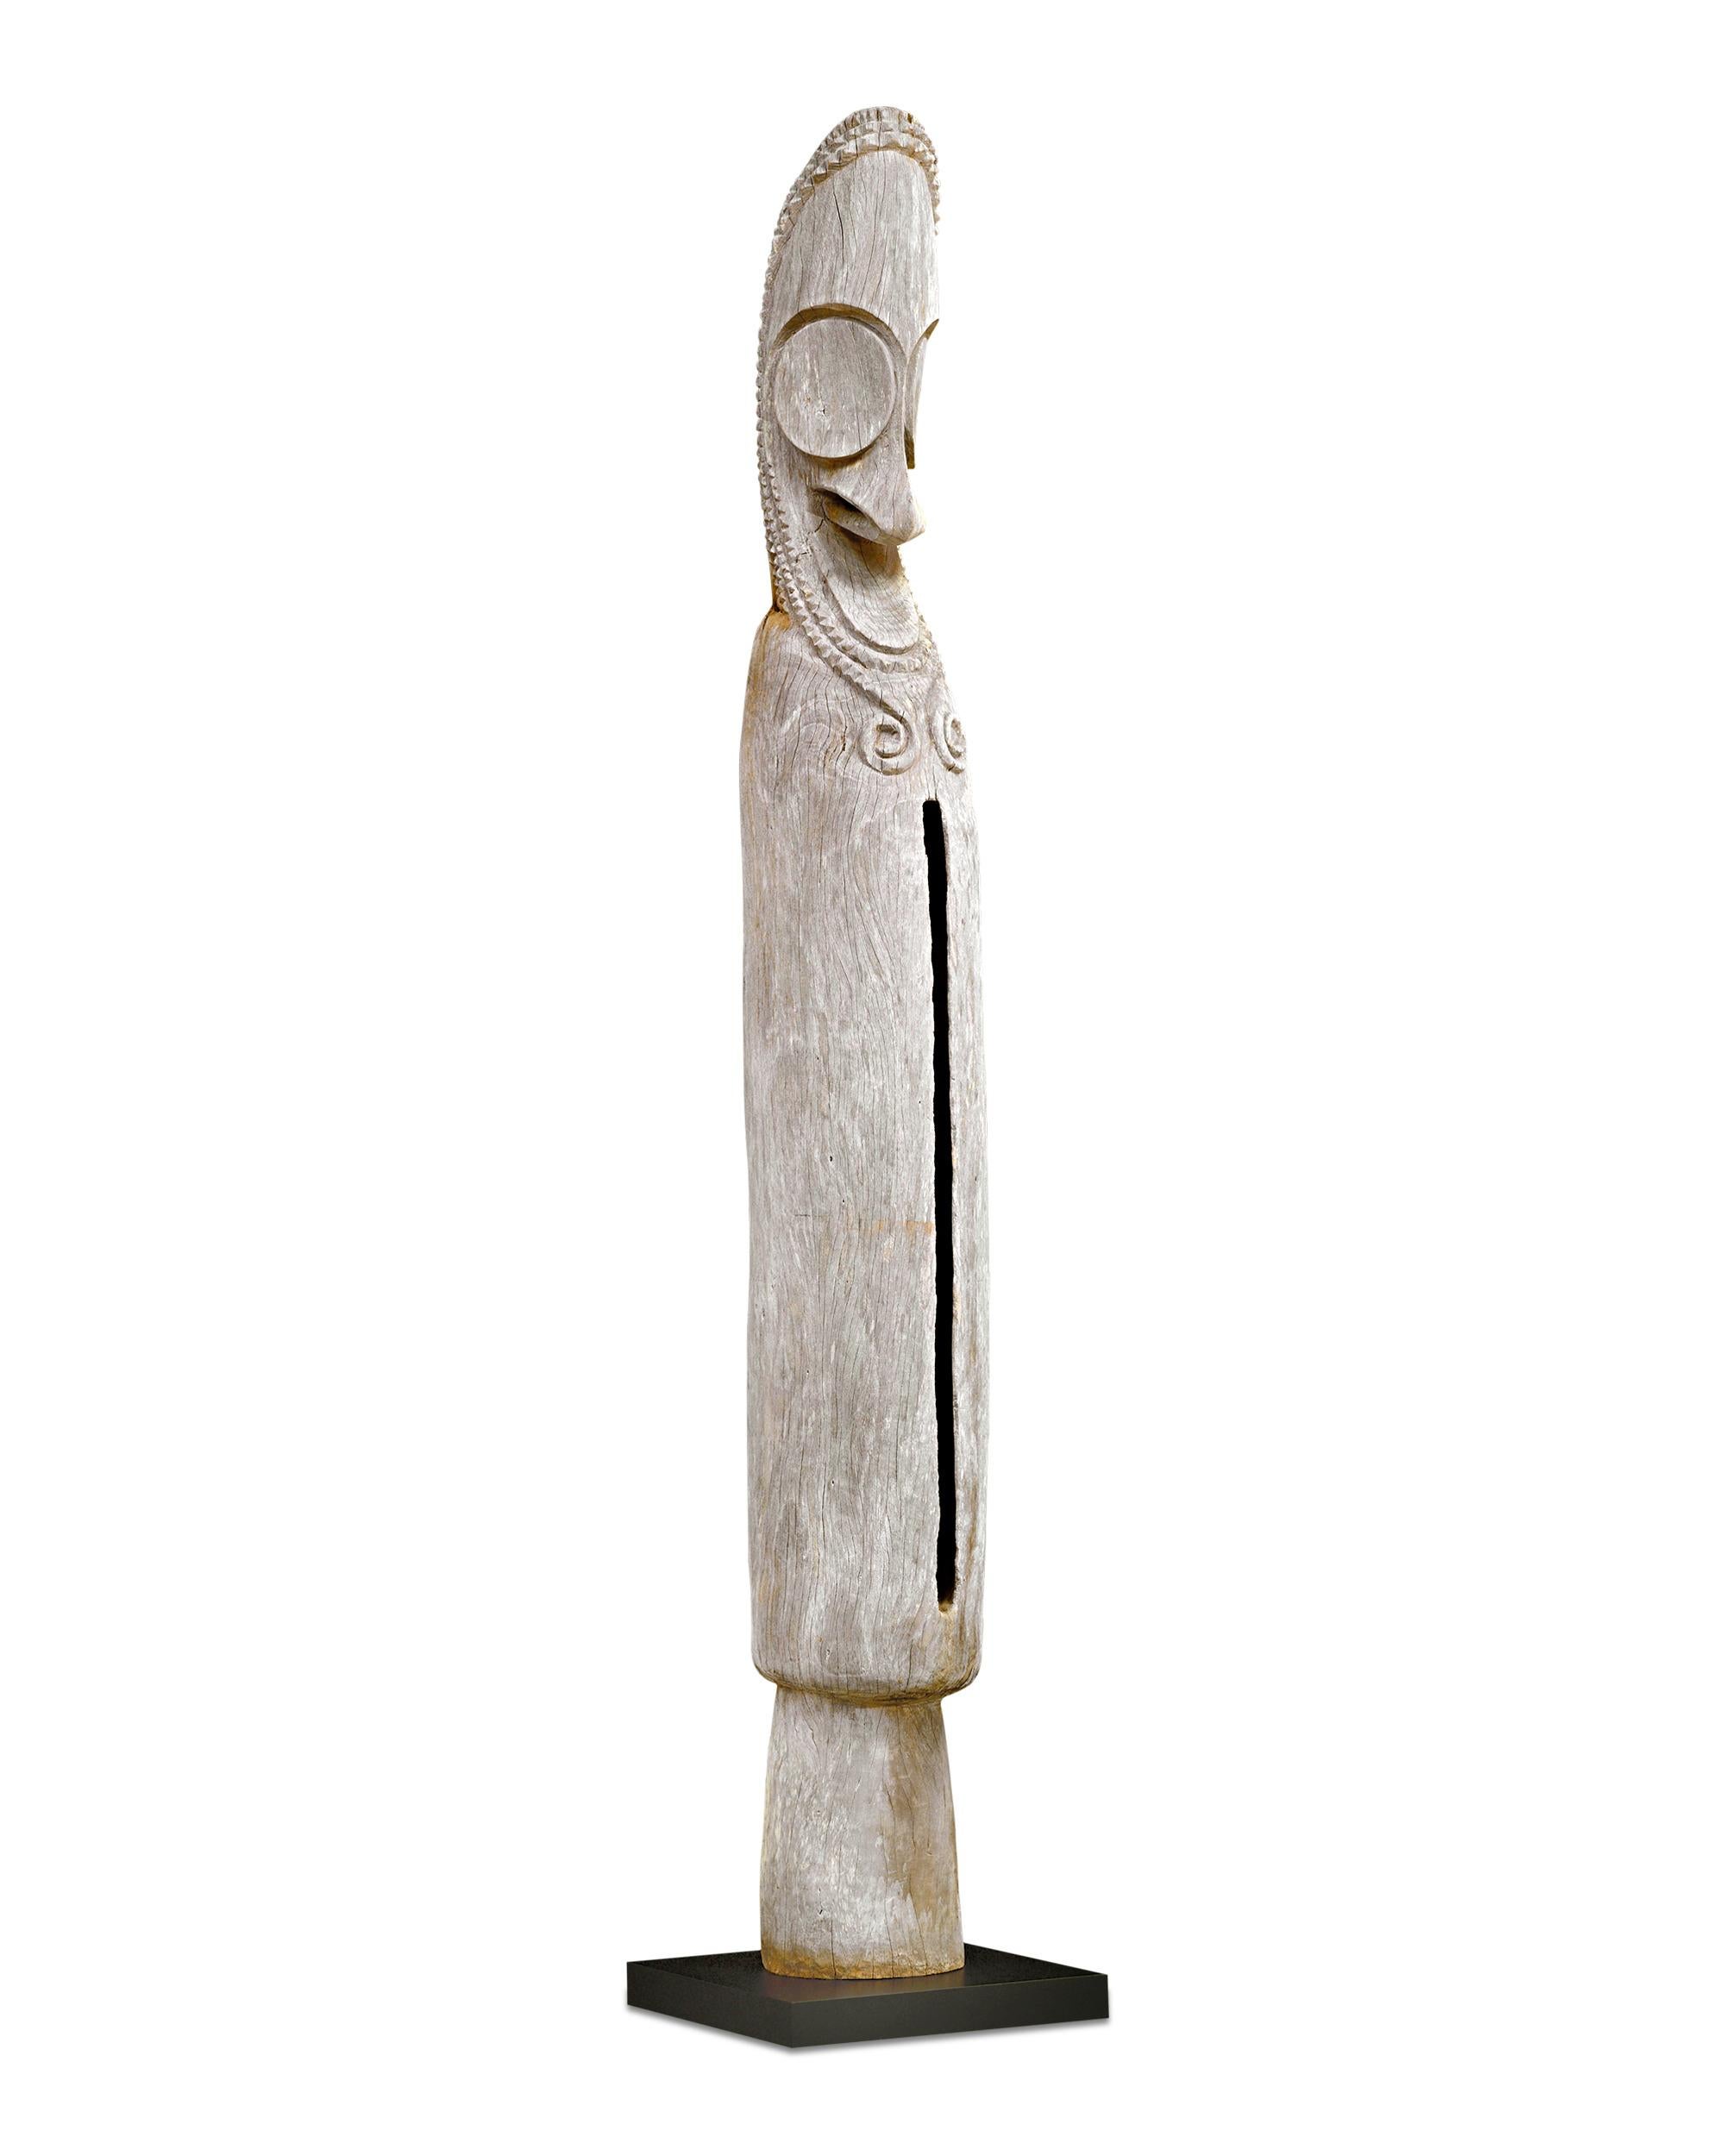 This 10-foot tall slit gong, called atingting kon in the local language, is characteristic of the ancestral craftsmanship of similar objects from Fanla village on the volcanic Ambrym Island, Vanuatu. Inextricably connected to the ritual life of the